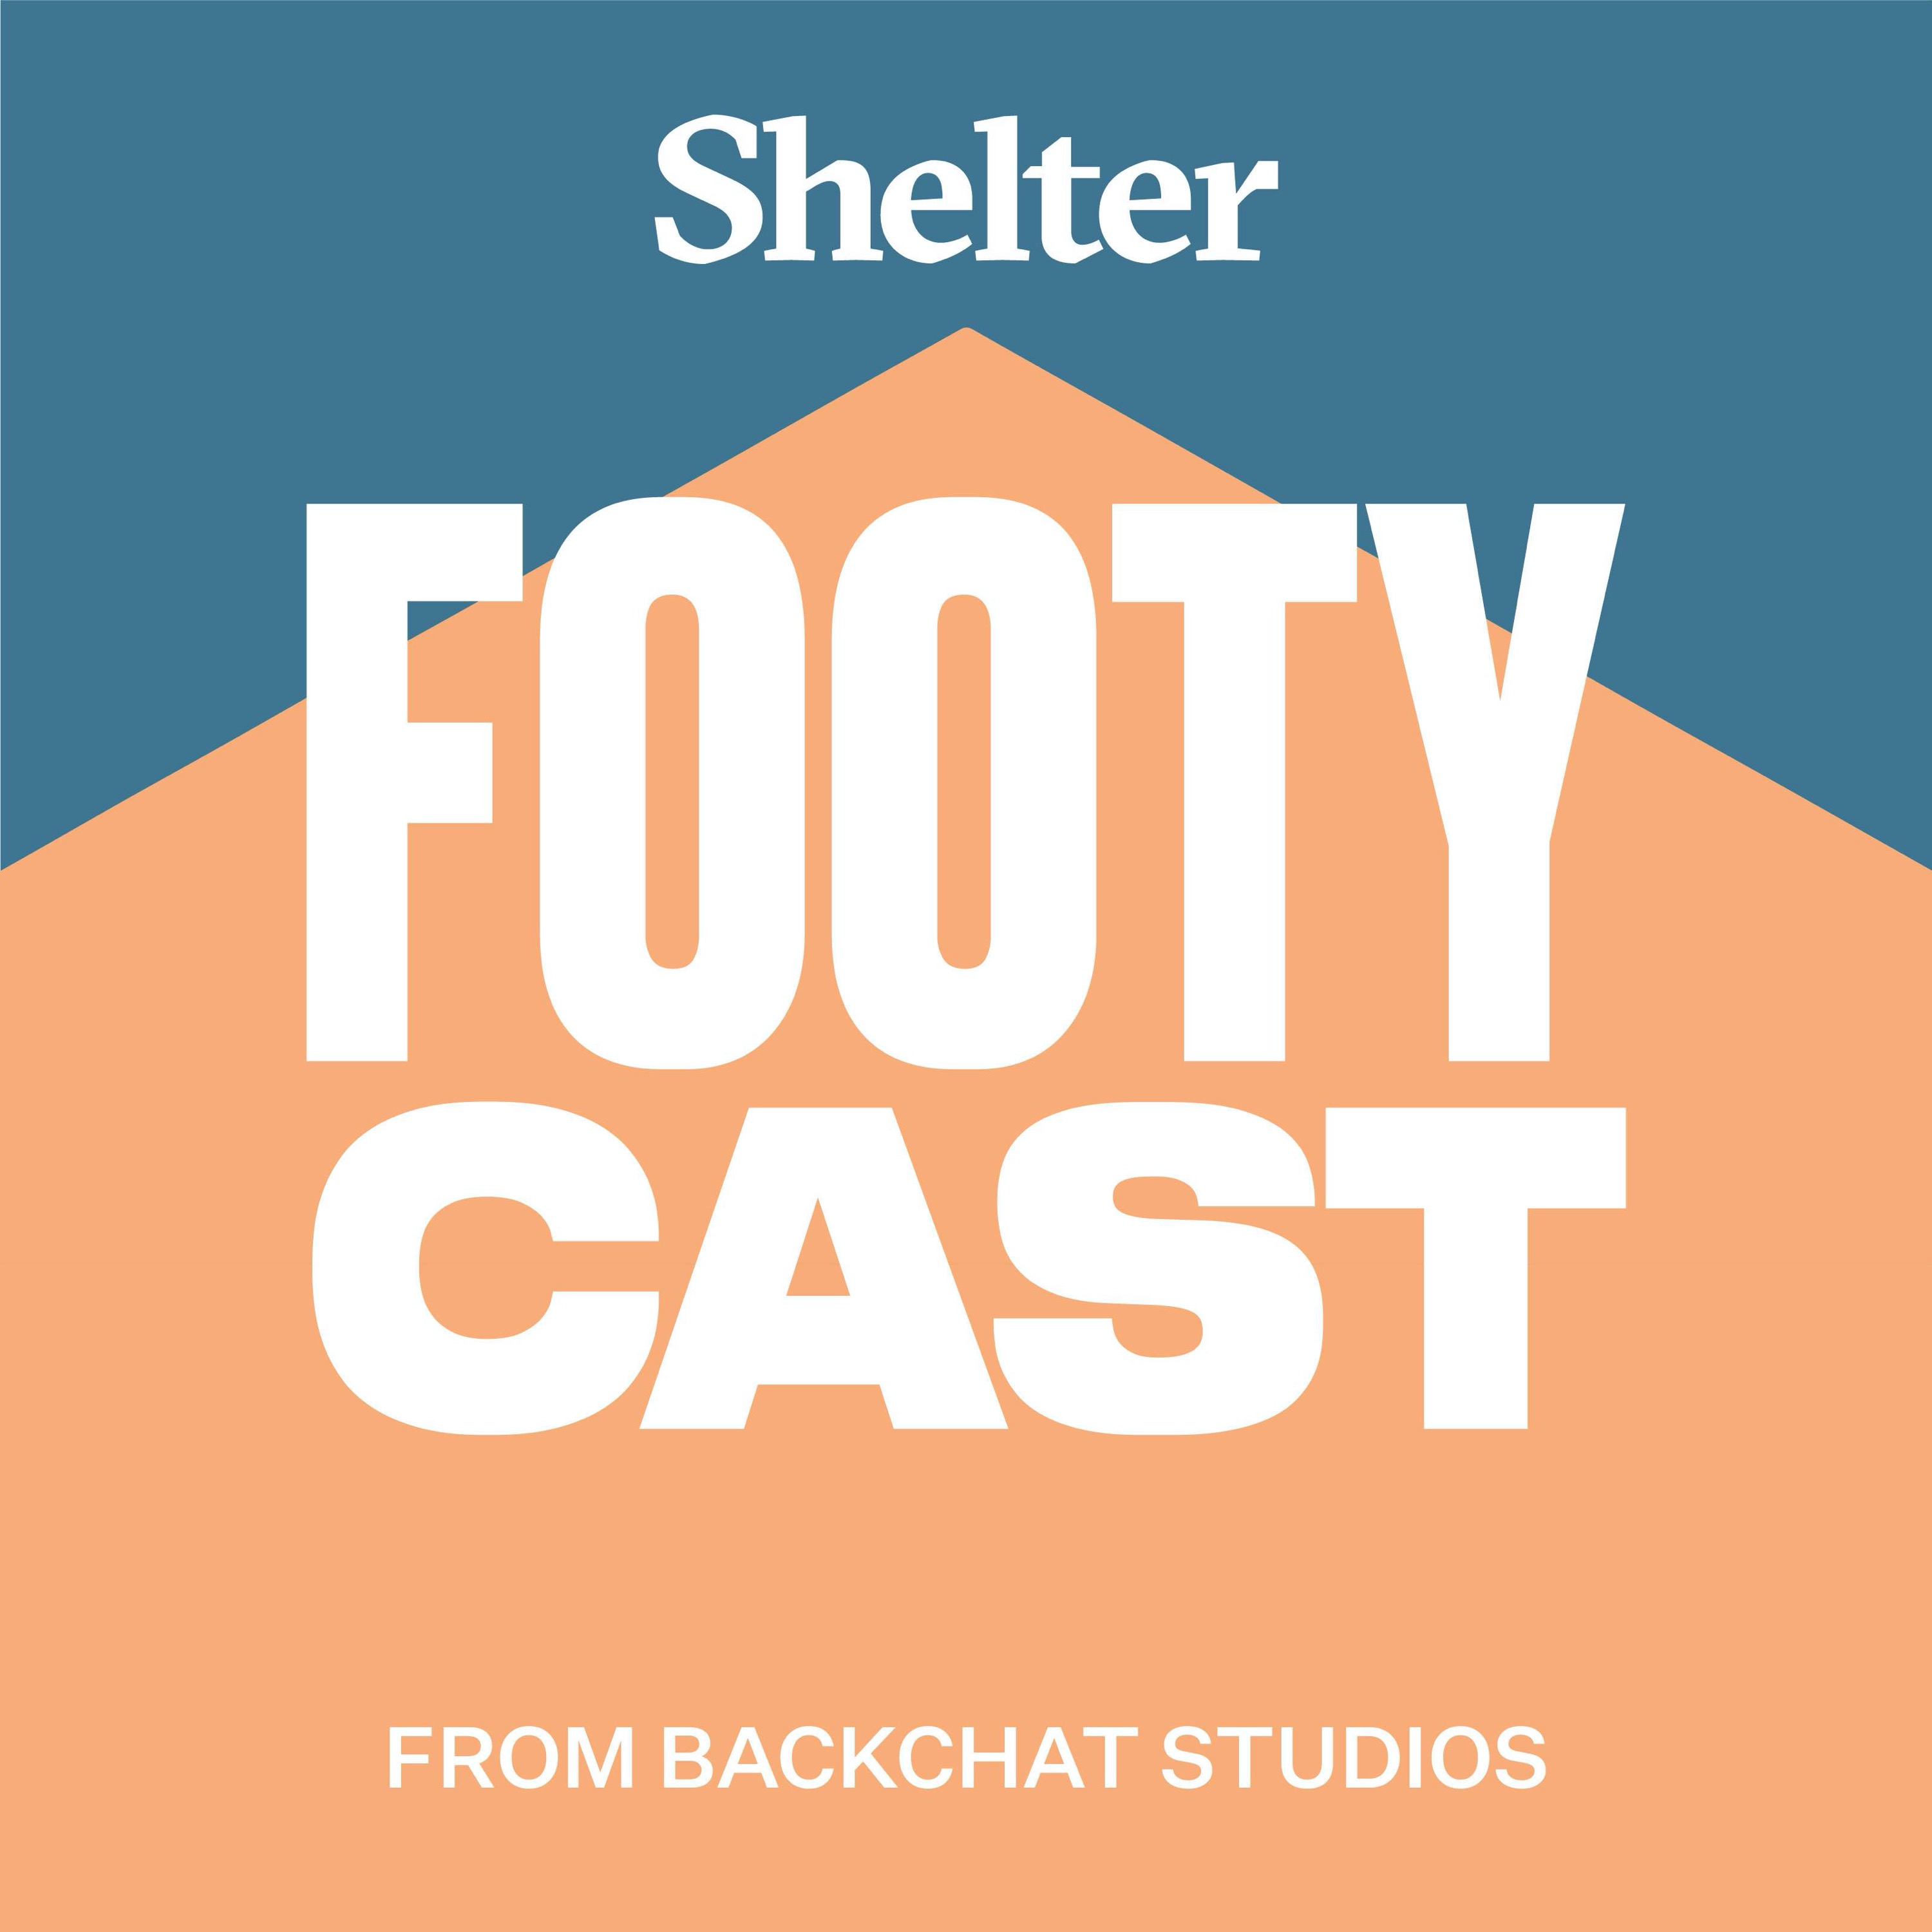 Shelter FootyCast Round 23 REVIEW